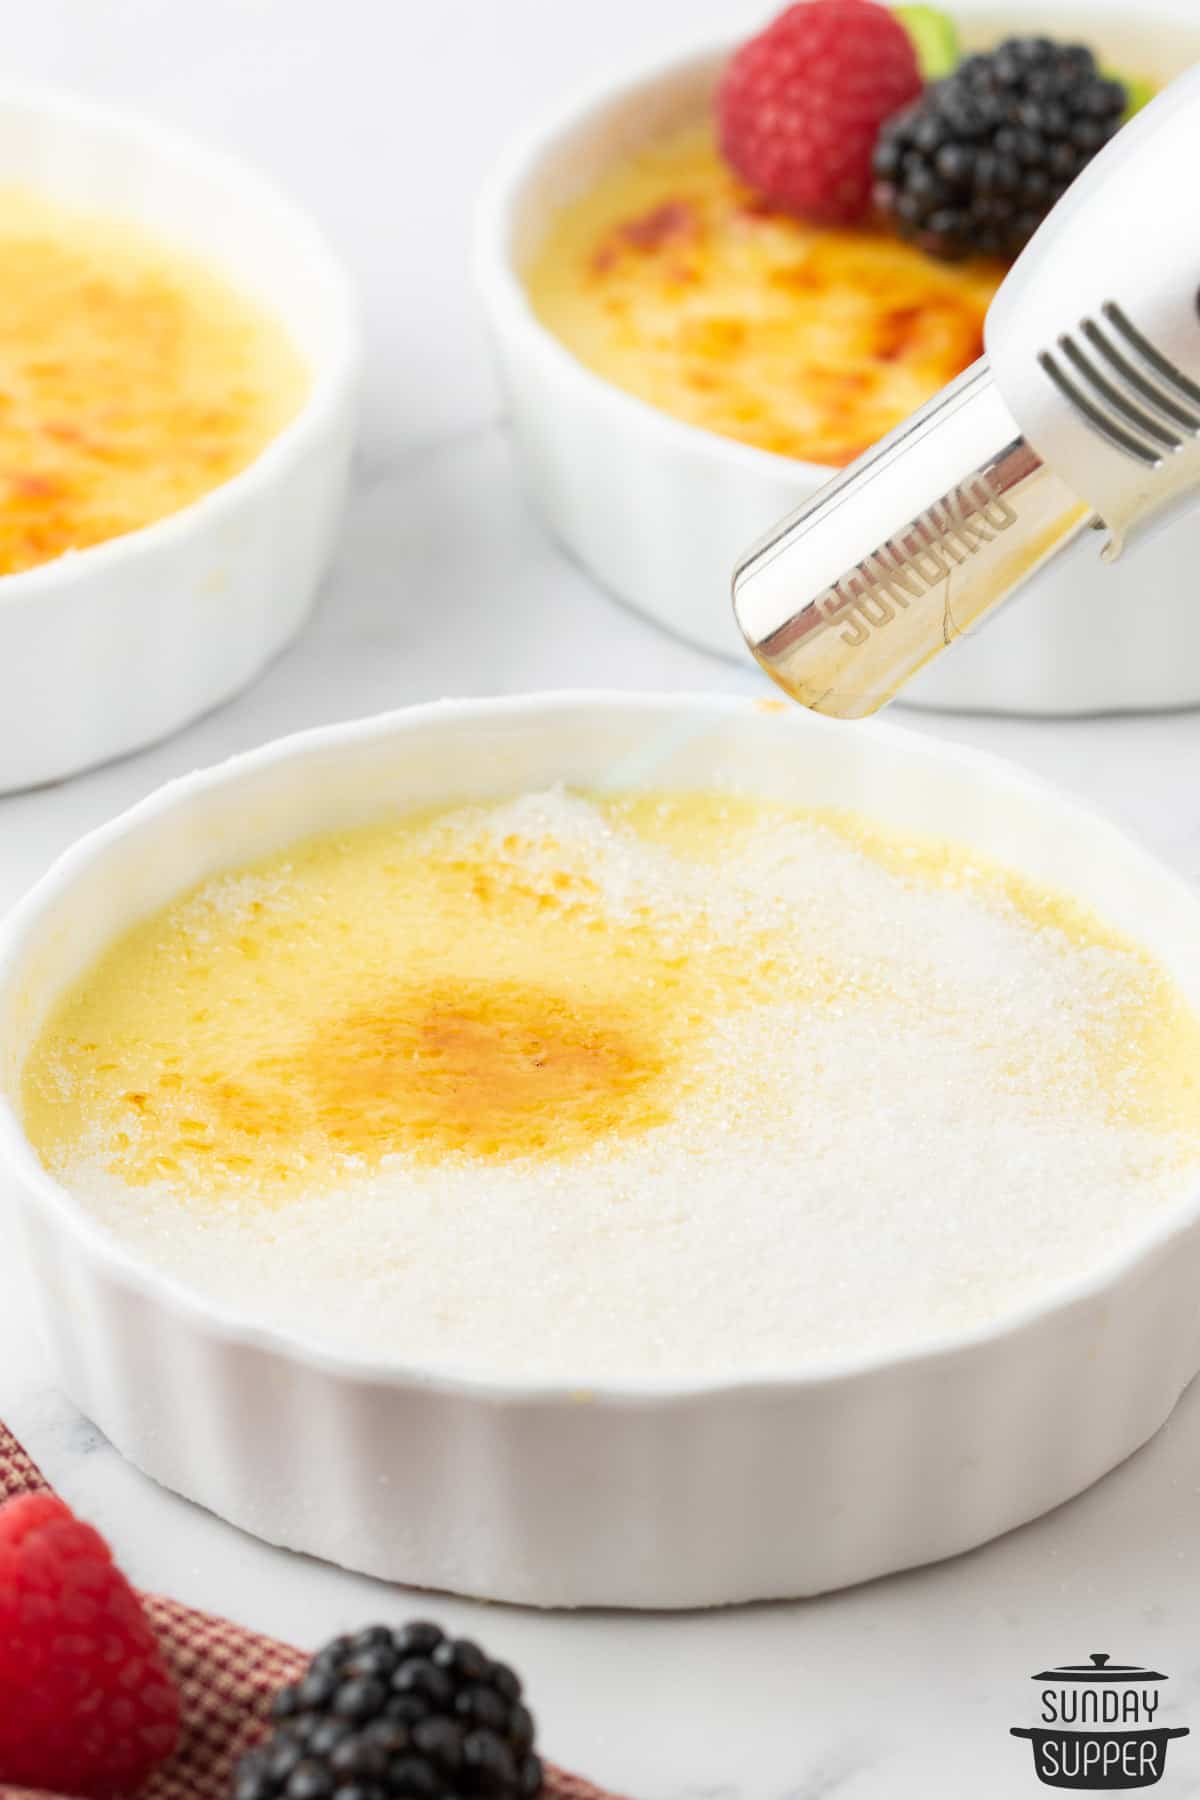 using a kitchen torch to caramelize the sugar coating on the creme brulee